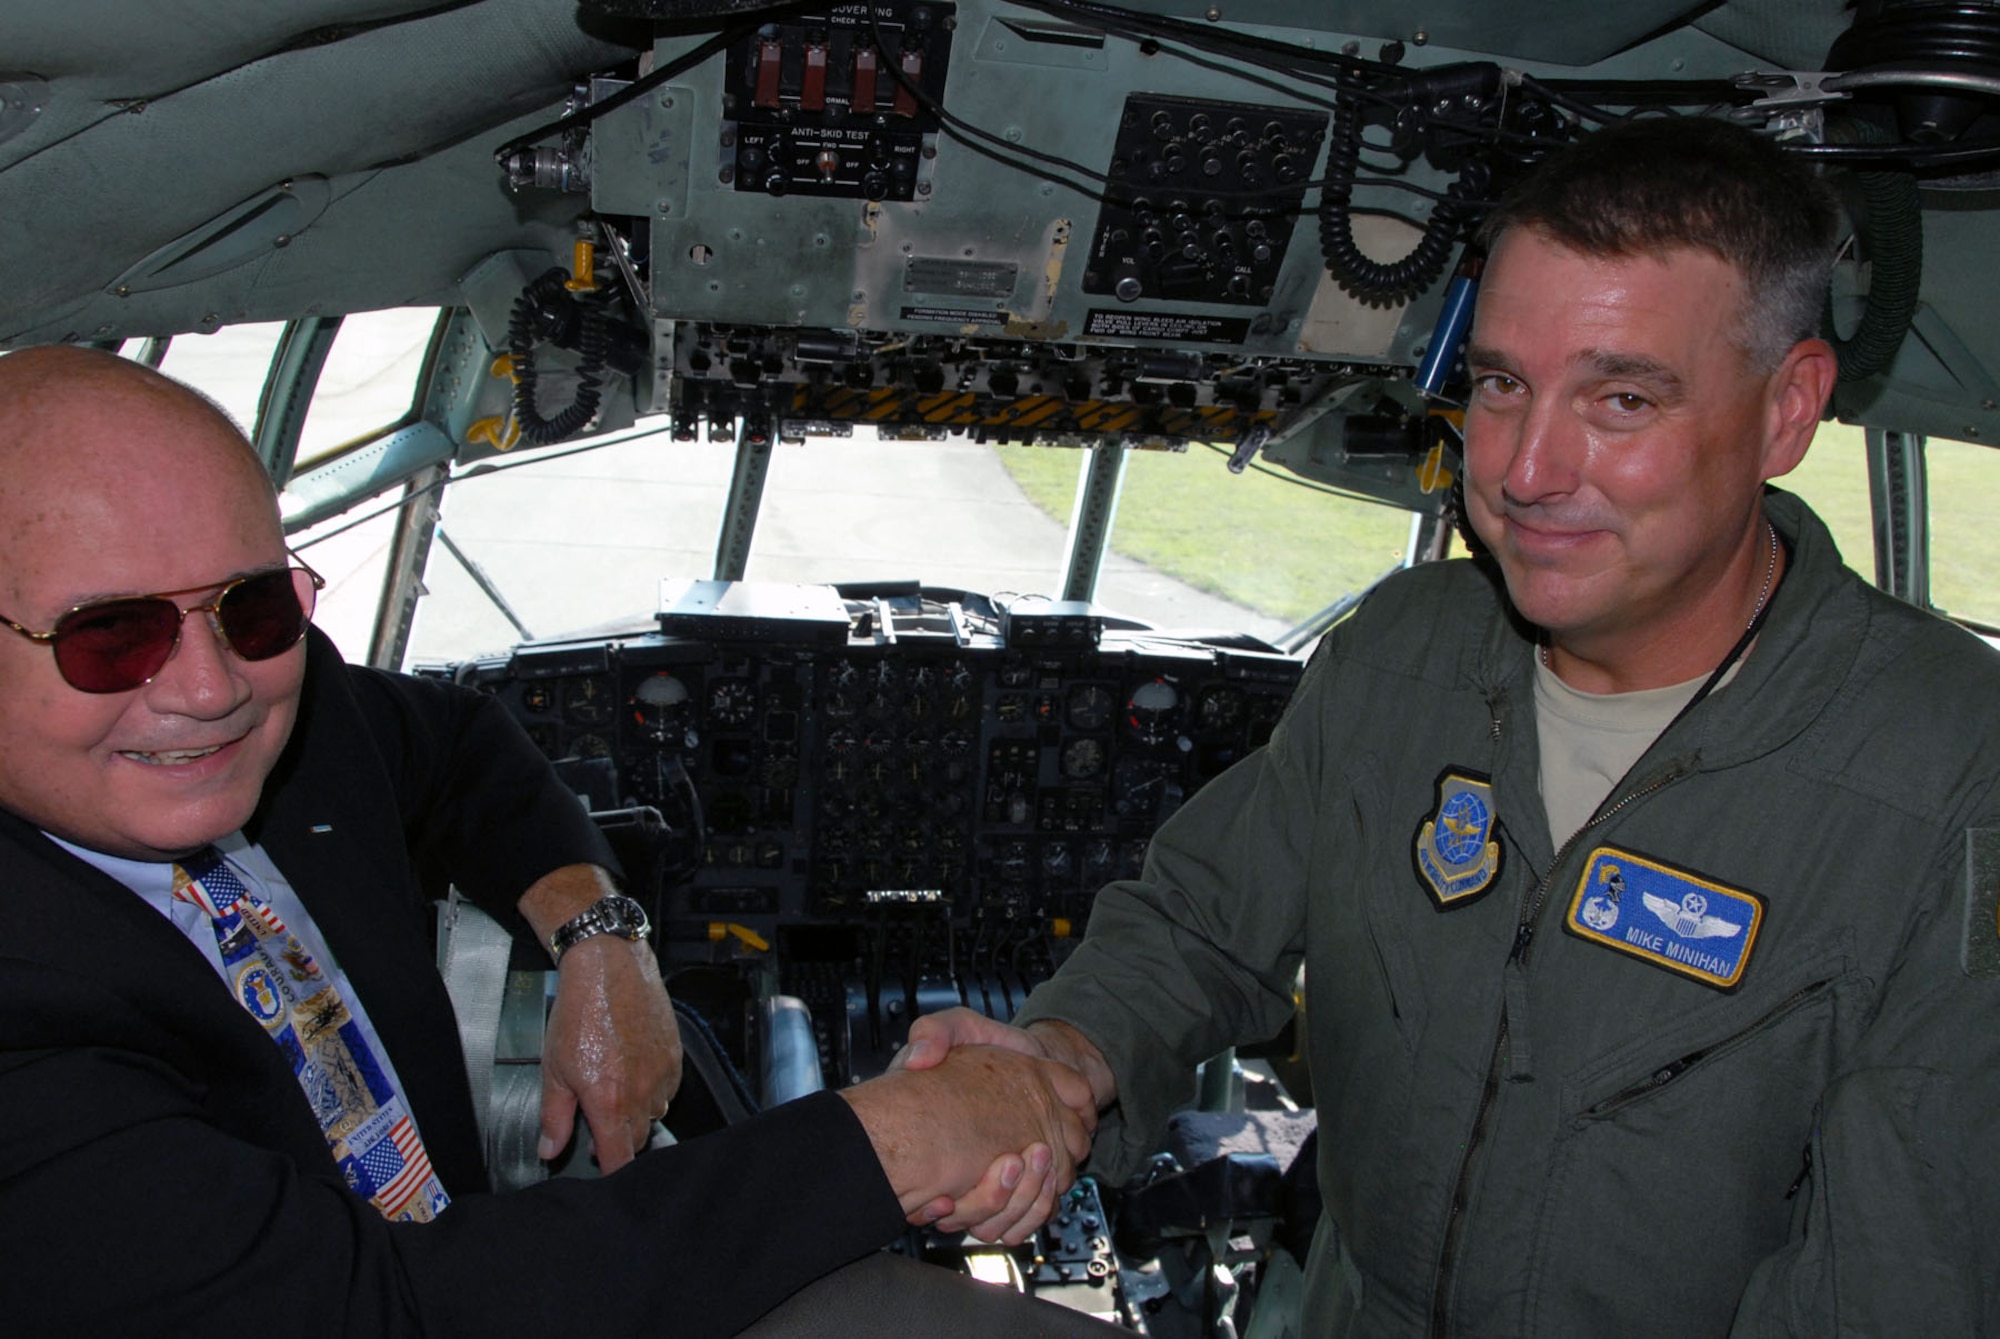 DAYTON, Ohio -- C-130E SPARE 617 made its final flight to the National Museum of the U.S. Air Force on Aug. 18, 2011. Here, Col. Michael A. Minihan, commander of the 19th Airlift Wing, shakes hands with Col. (Ret.) William Caldwell, who received the Air Force Cross while piloting the aircraft during the Southeast Asia War. (U.S. Air Force photo by Jeff Fisher)